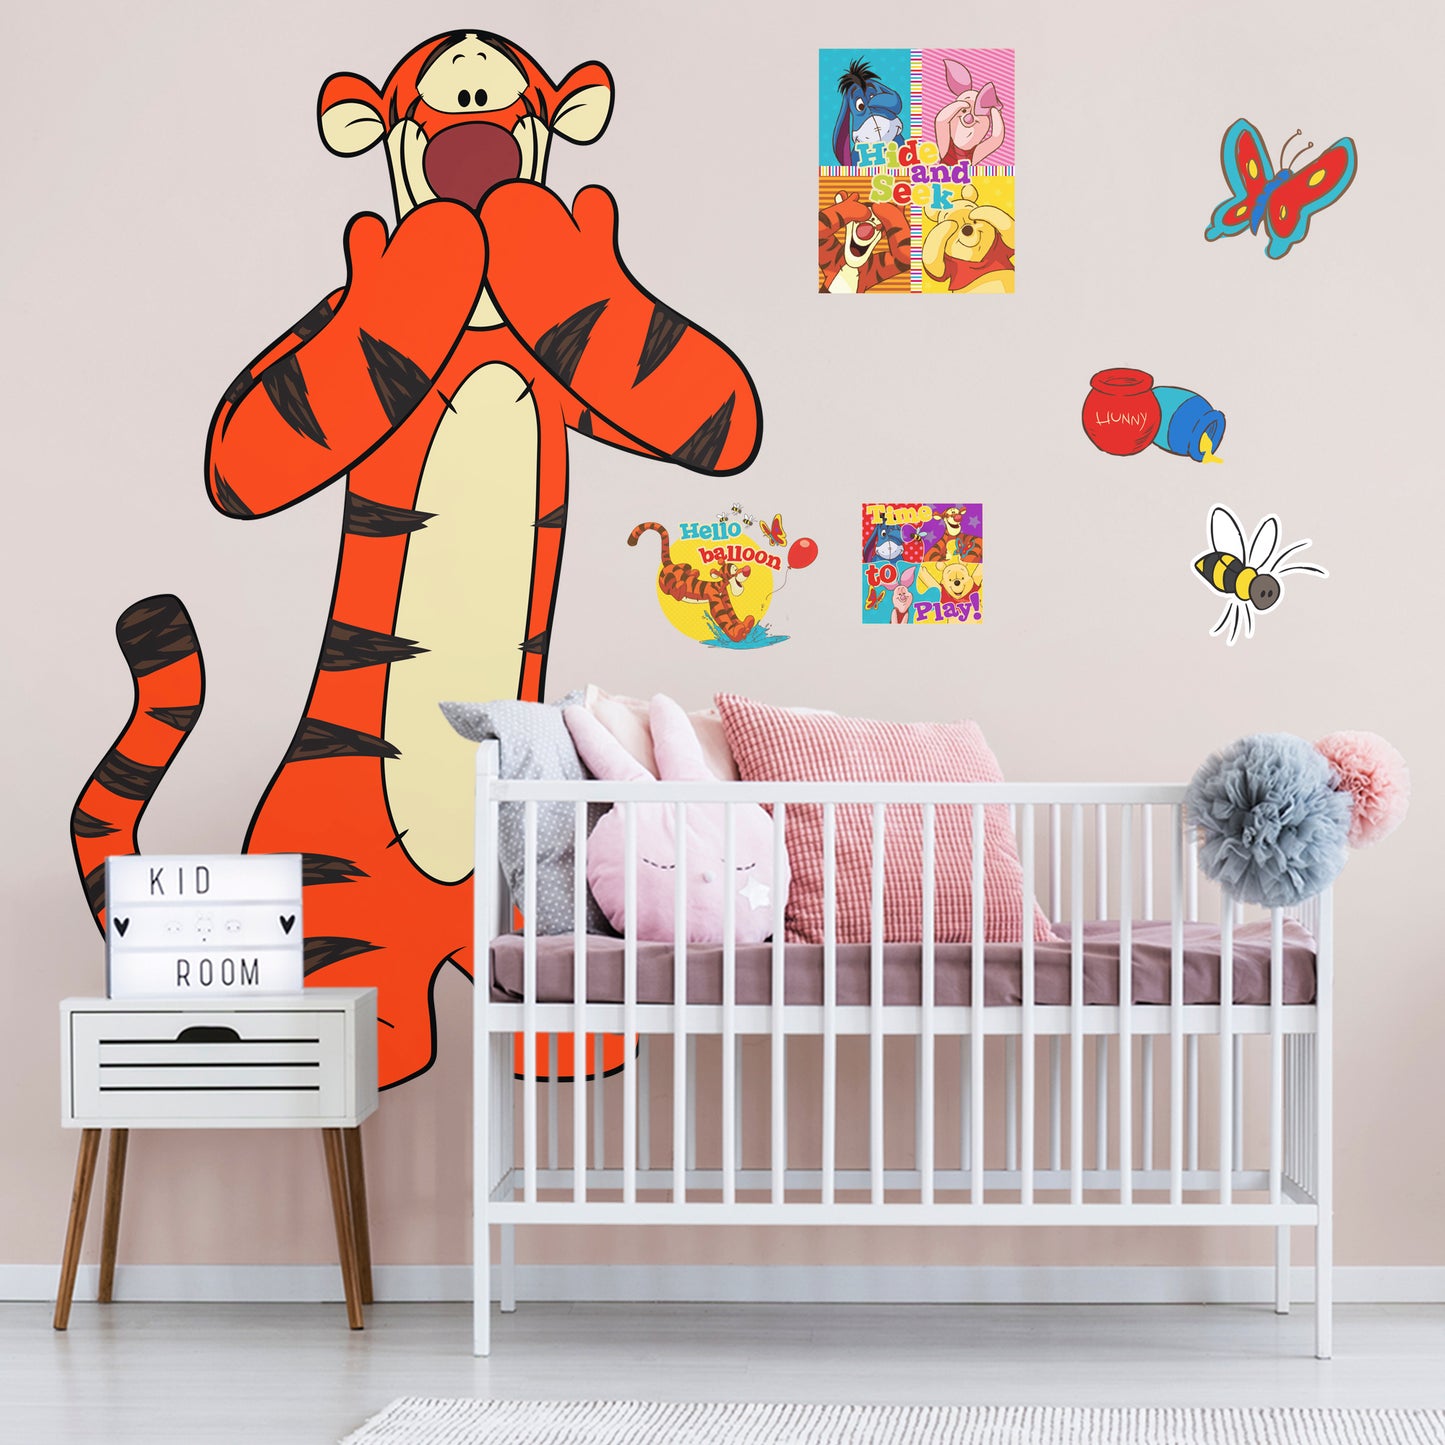 Life-Size Character +7 Decals  (60"W x 36"H)